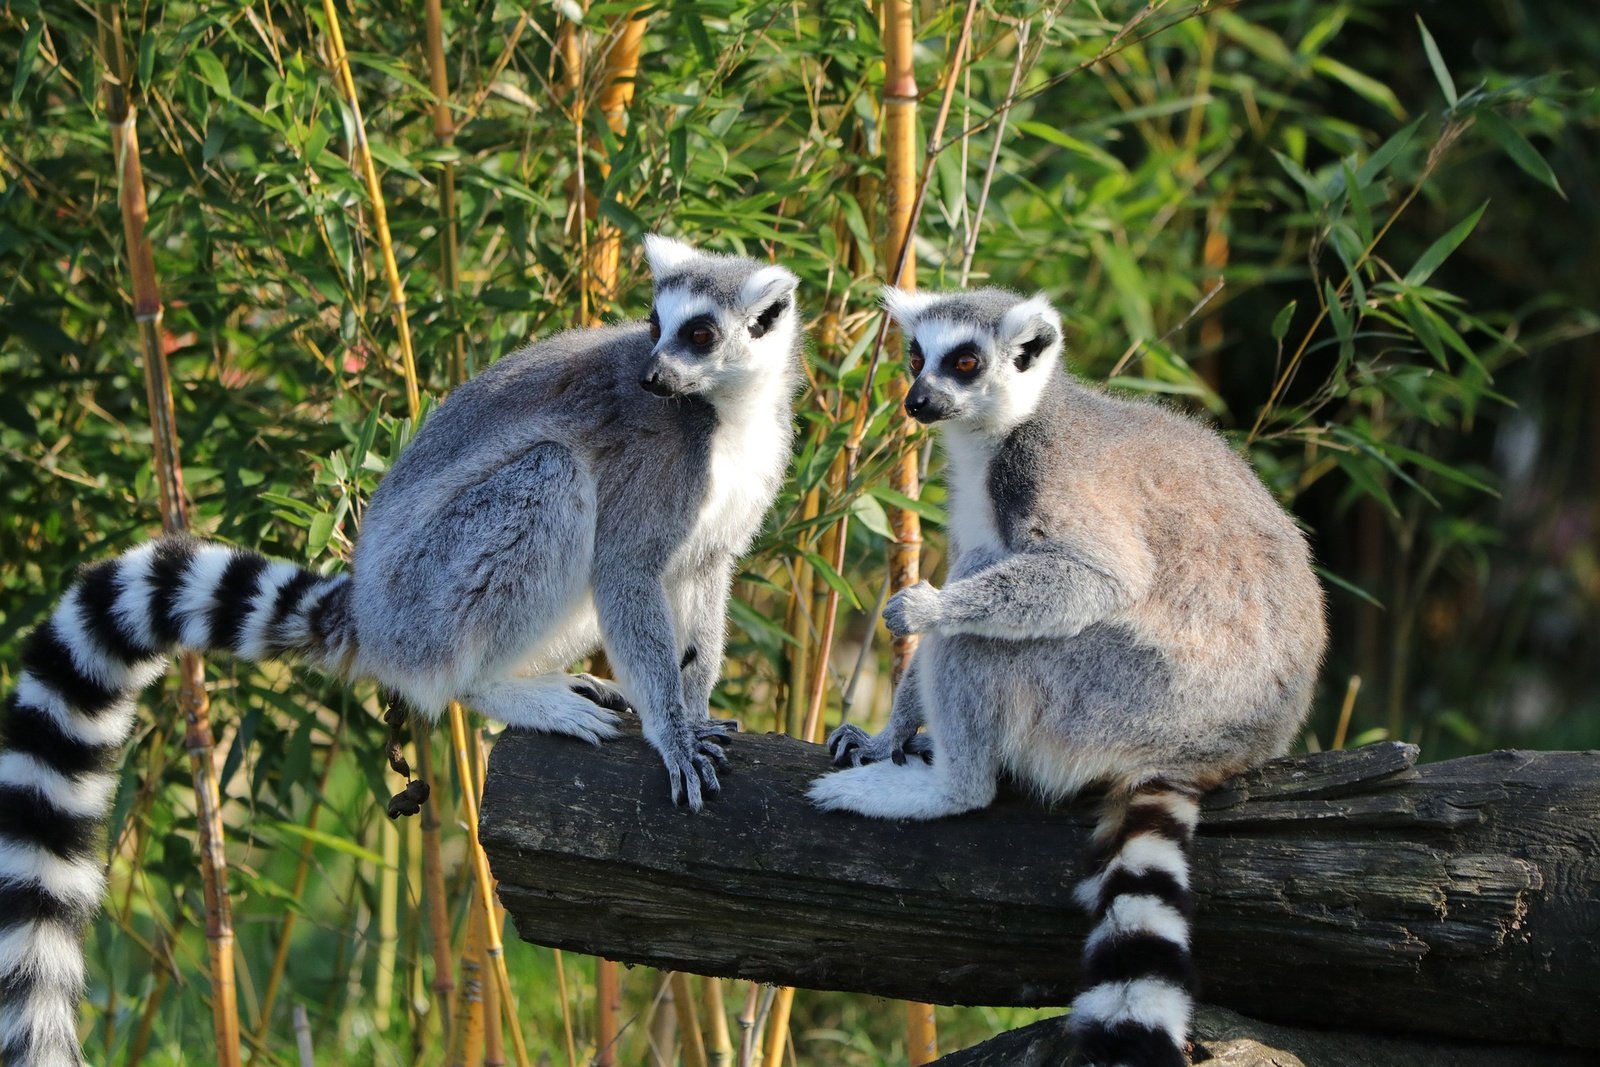 Also called the eighth continent, Madagascar is mostly known for its endemic species. Explore this biodiversity hotspot!